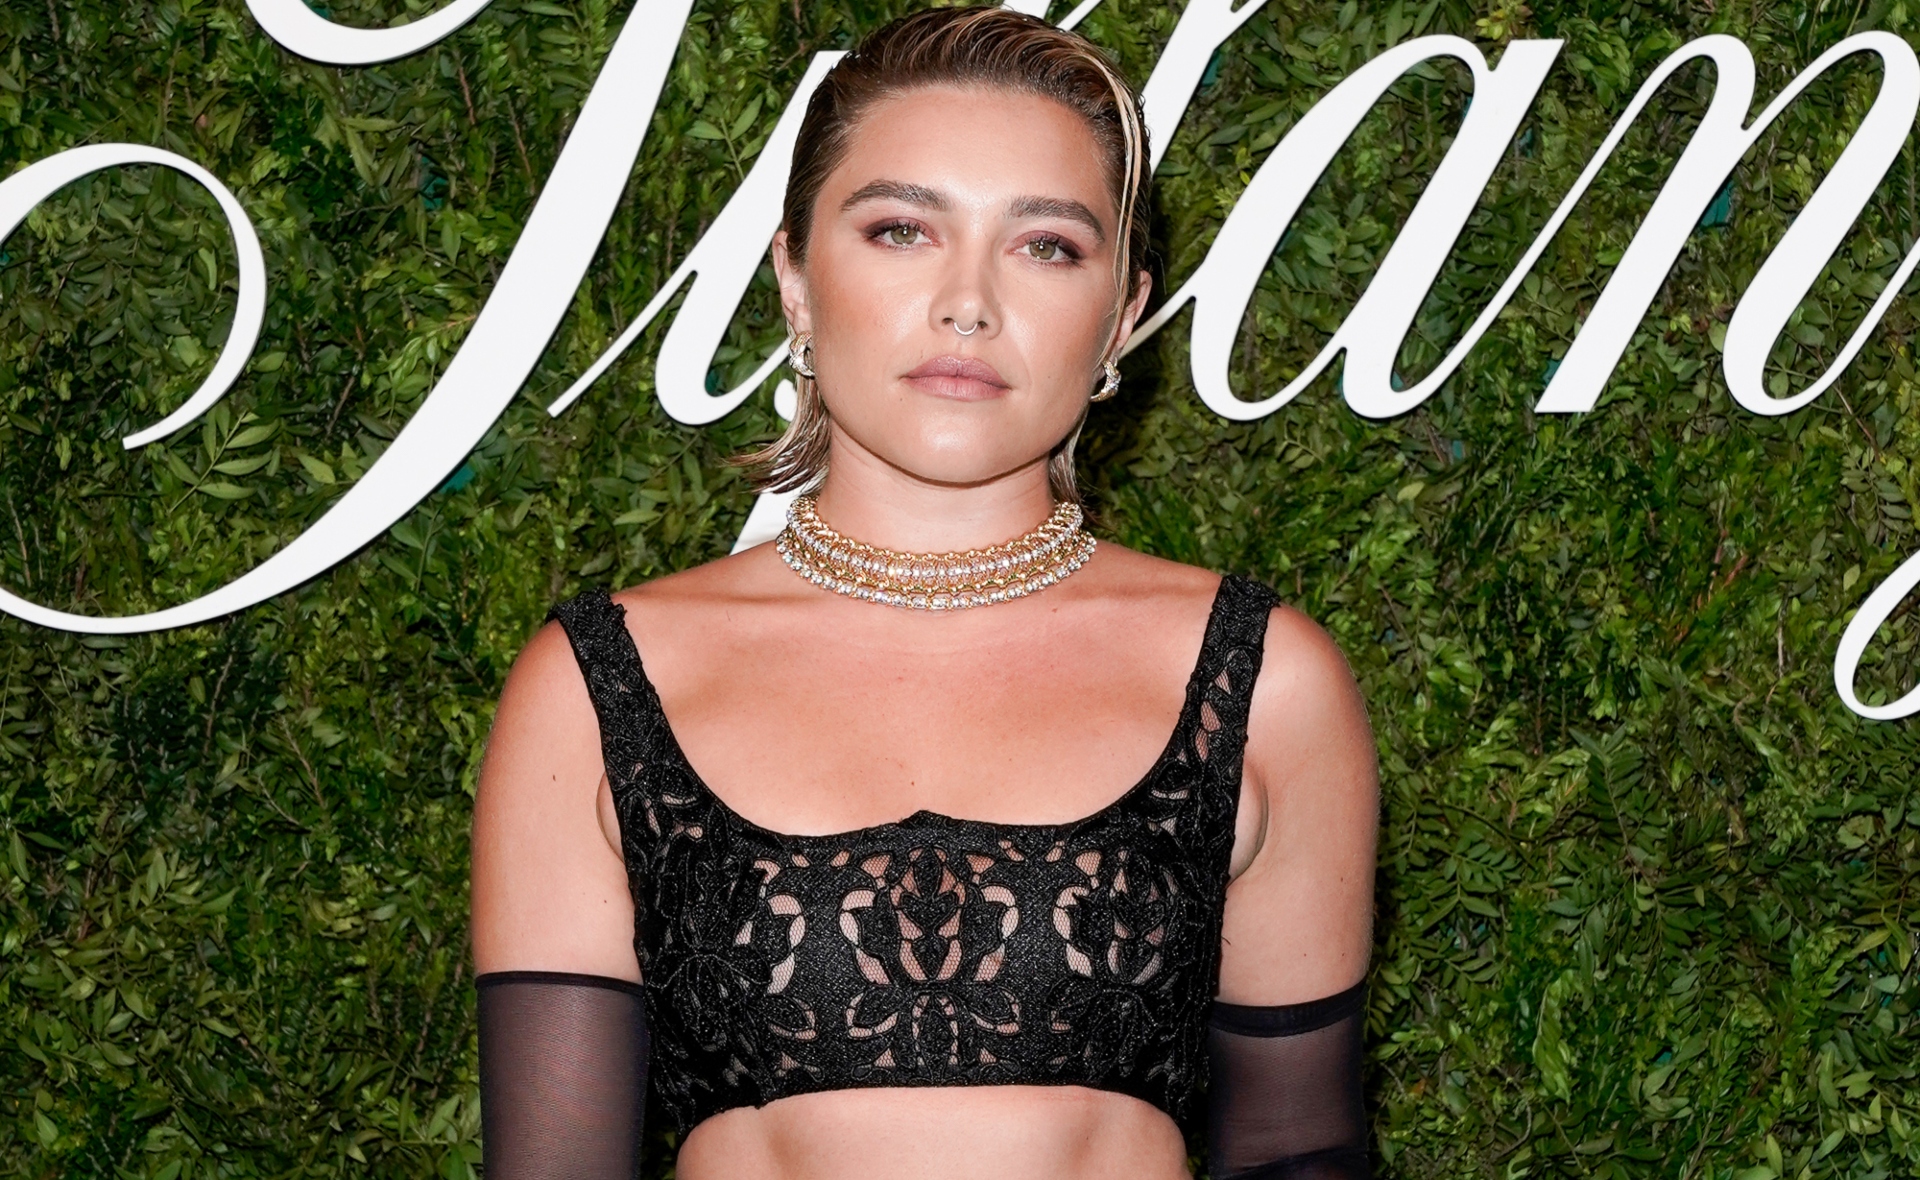 Florence Pugh On The Jewellery Item From Her First Boyfriend That Gave Her “Goosebumps”